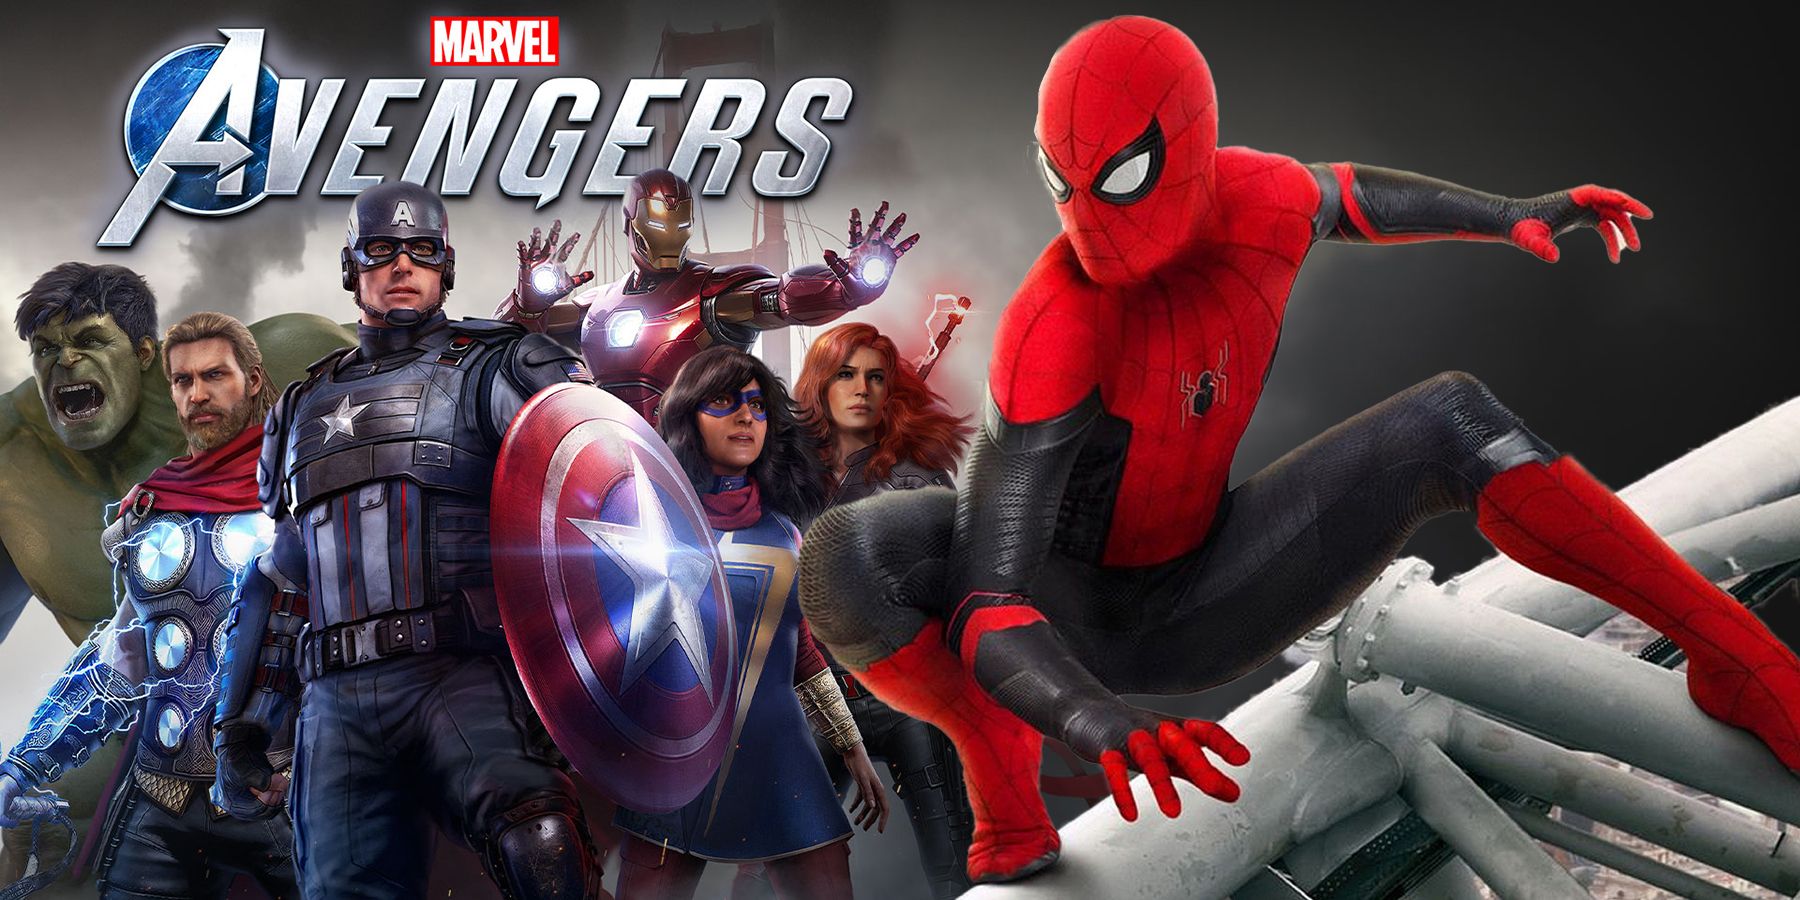 Marvels Avengers SpiderMan Reveal Coming Next Week But It Might Be Cutting It Too Close